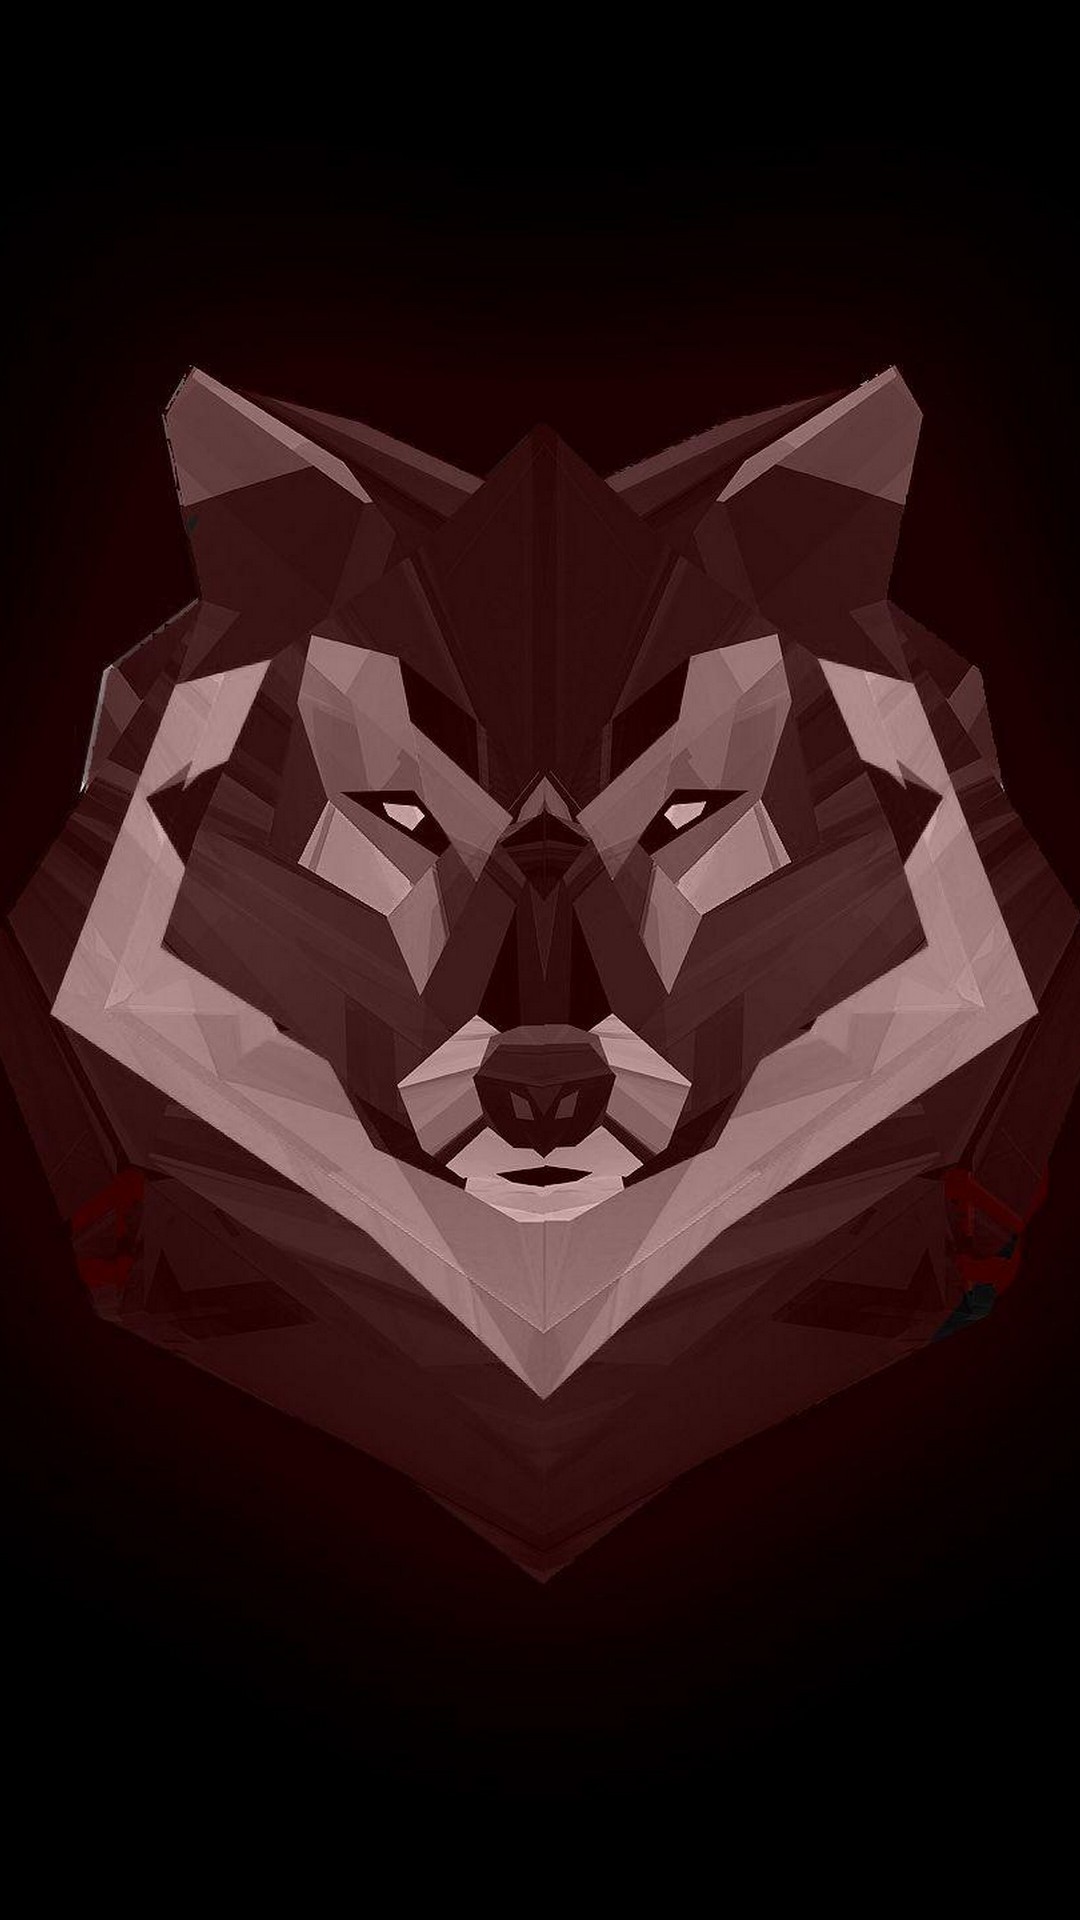 Cool Wolf iPhone Wallpaper With high-resolution 1080X1920 pixel. You can set as wallpaper for Apple iPhone X, XS Max, XR, 8, 7, 6, SE, iPad. Enjoy and share your favorite HD wallpapers and background images